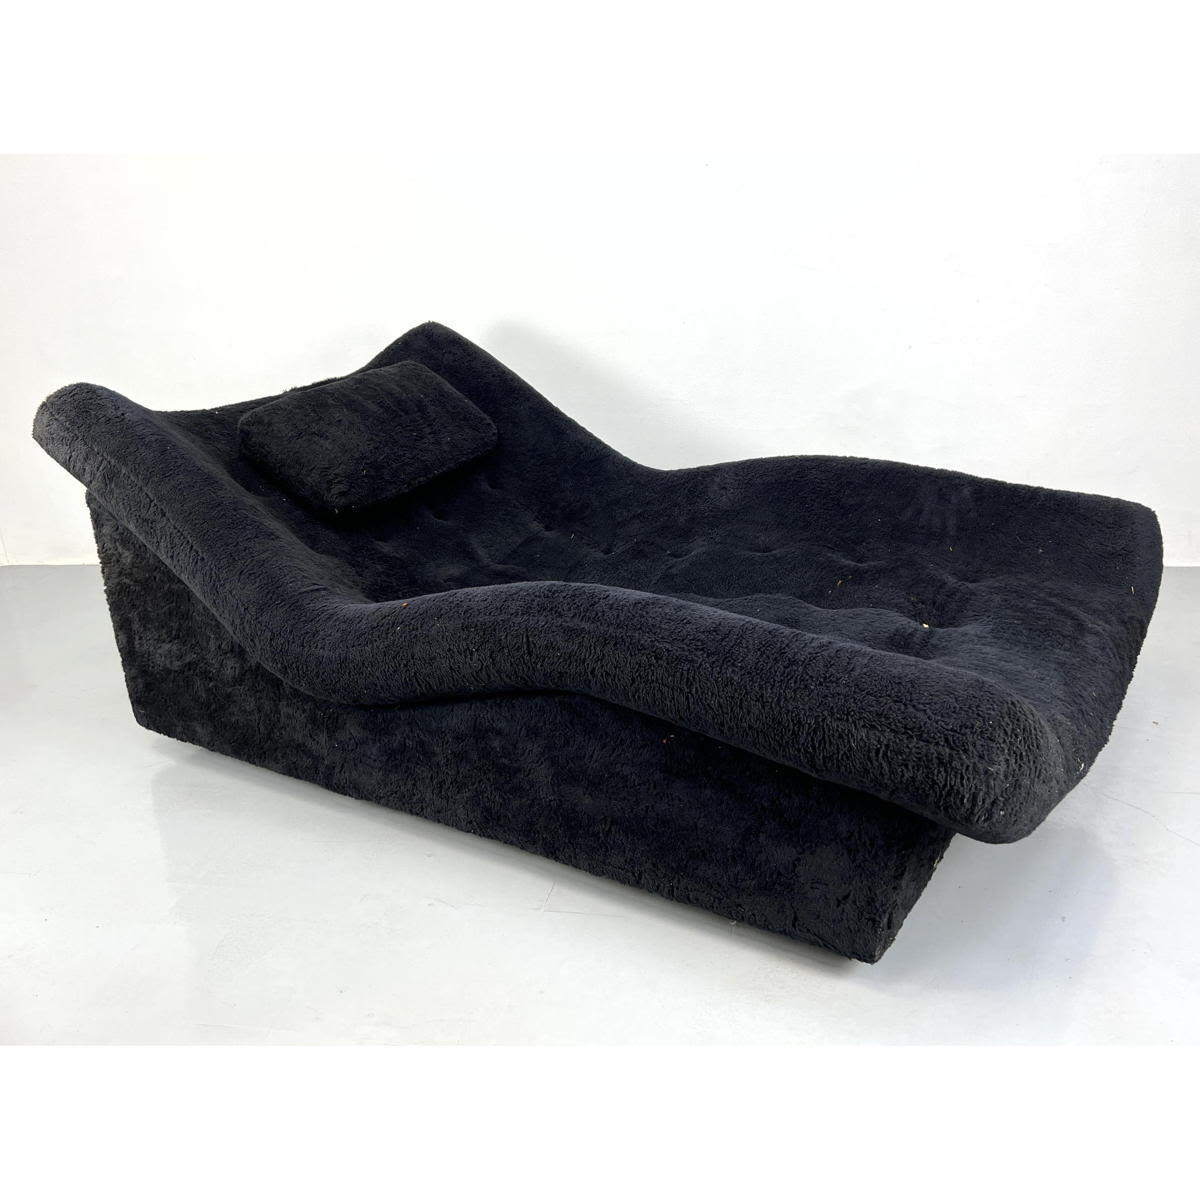 Oversized Modernist Wave Chaise 2a7847